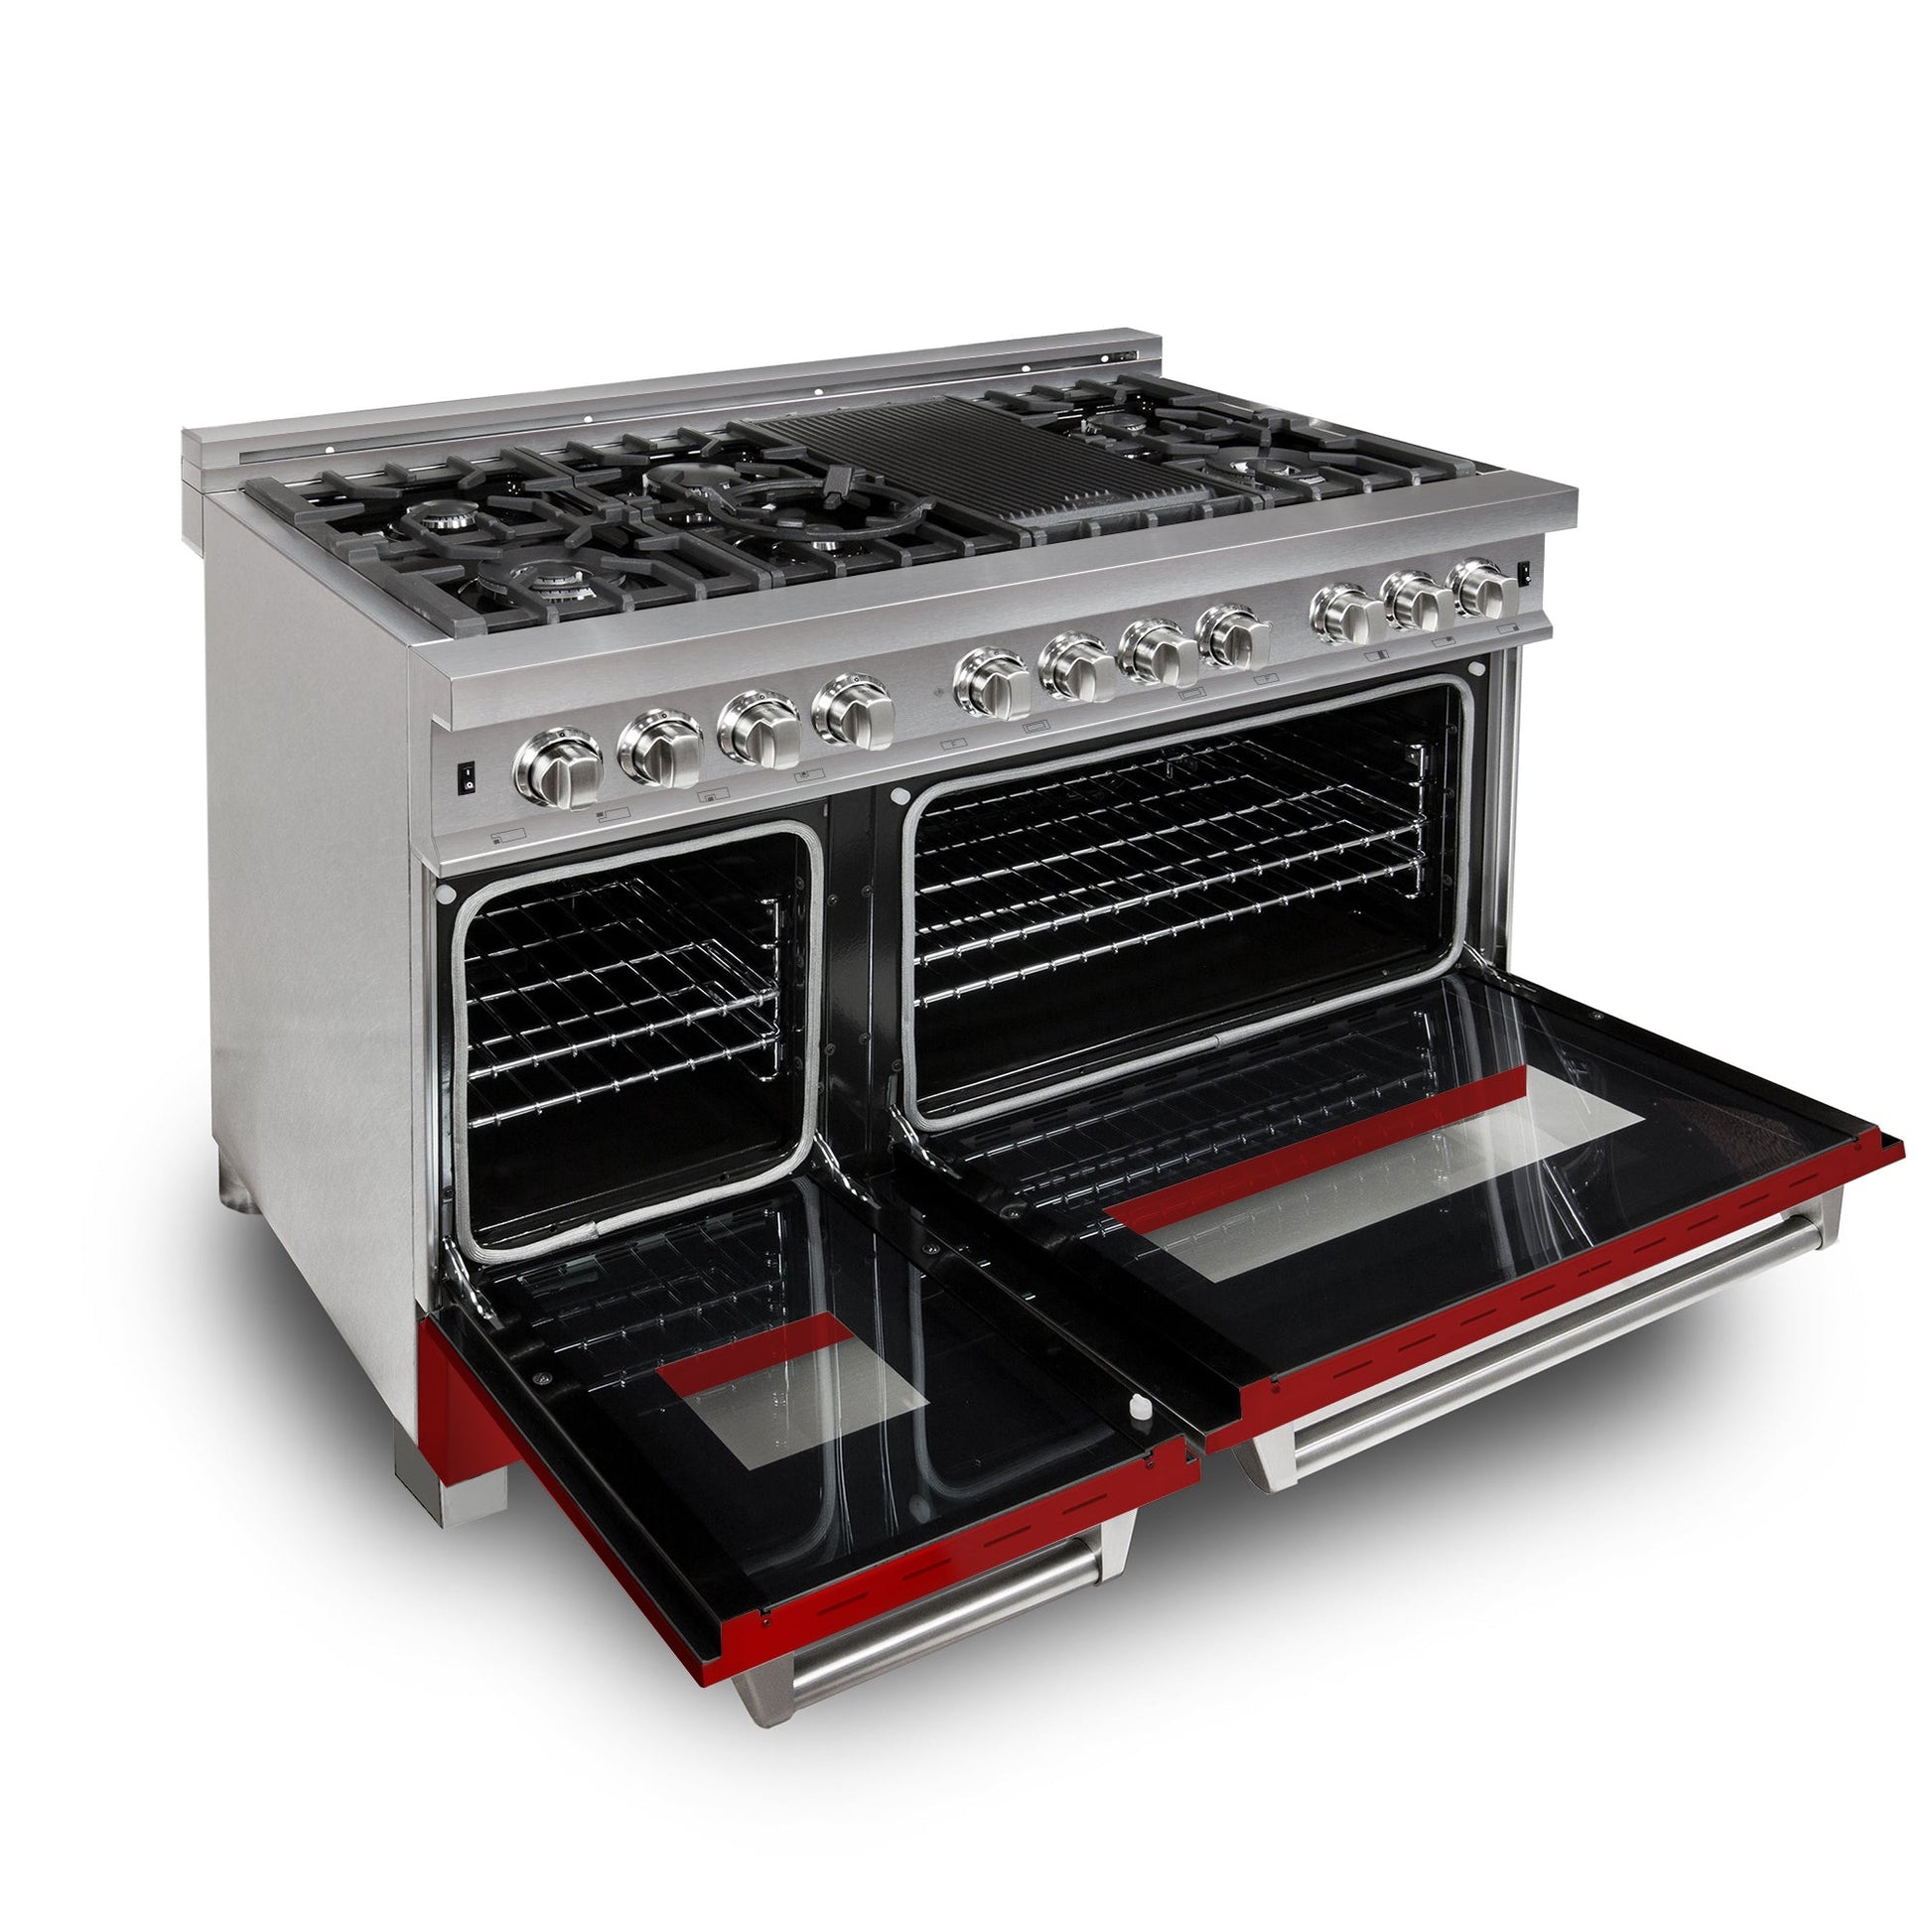 ZLINE 2-Appliance 48" Kitchen Package with DuraSnow Stainless Steel Dual Fuel Range with Matte Red Door and Convertible Vent Range Hood